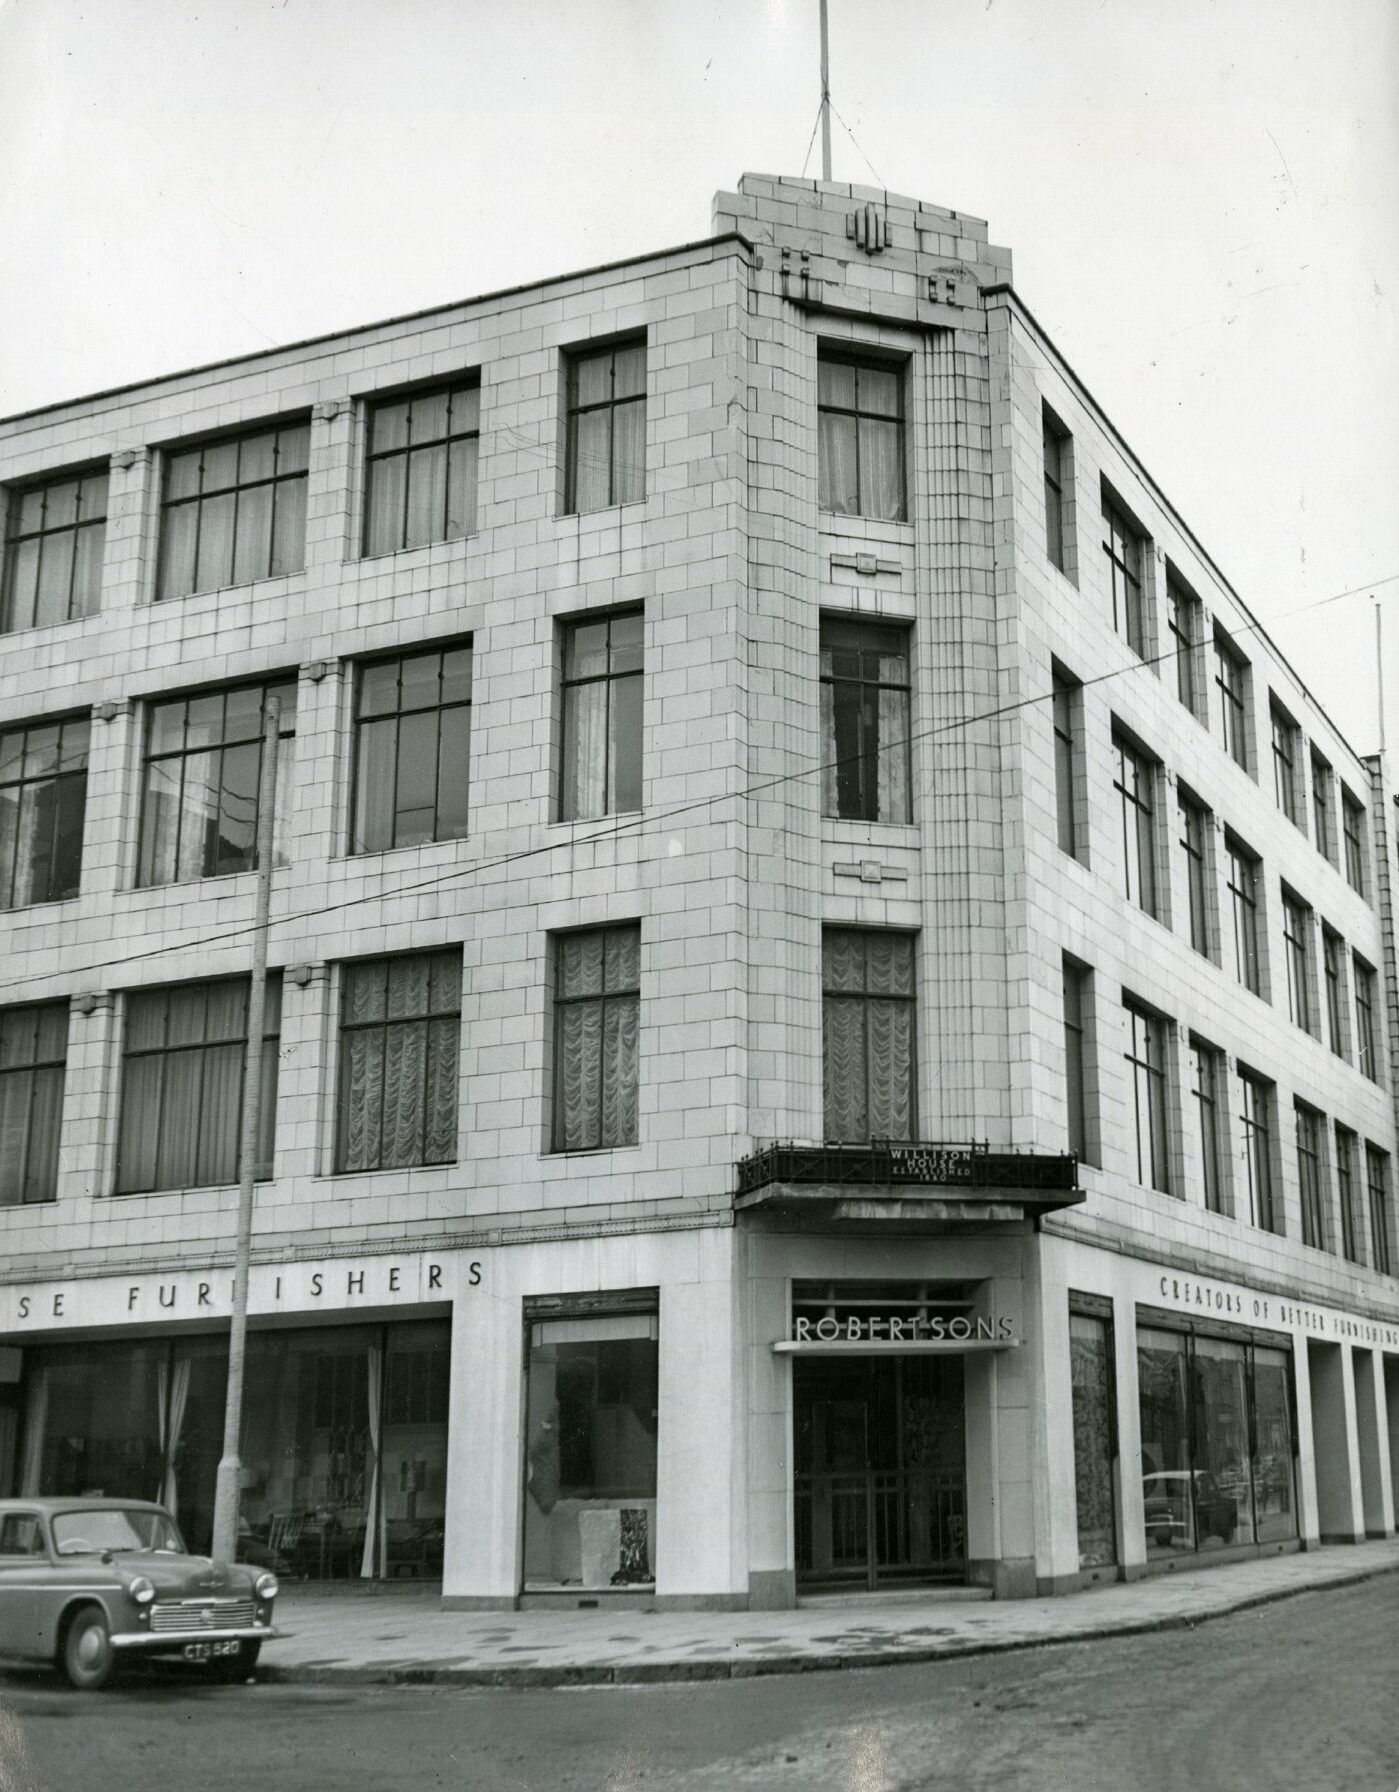 The exterior of Robertson's in 1966. Image: DC Thomson.